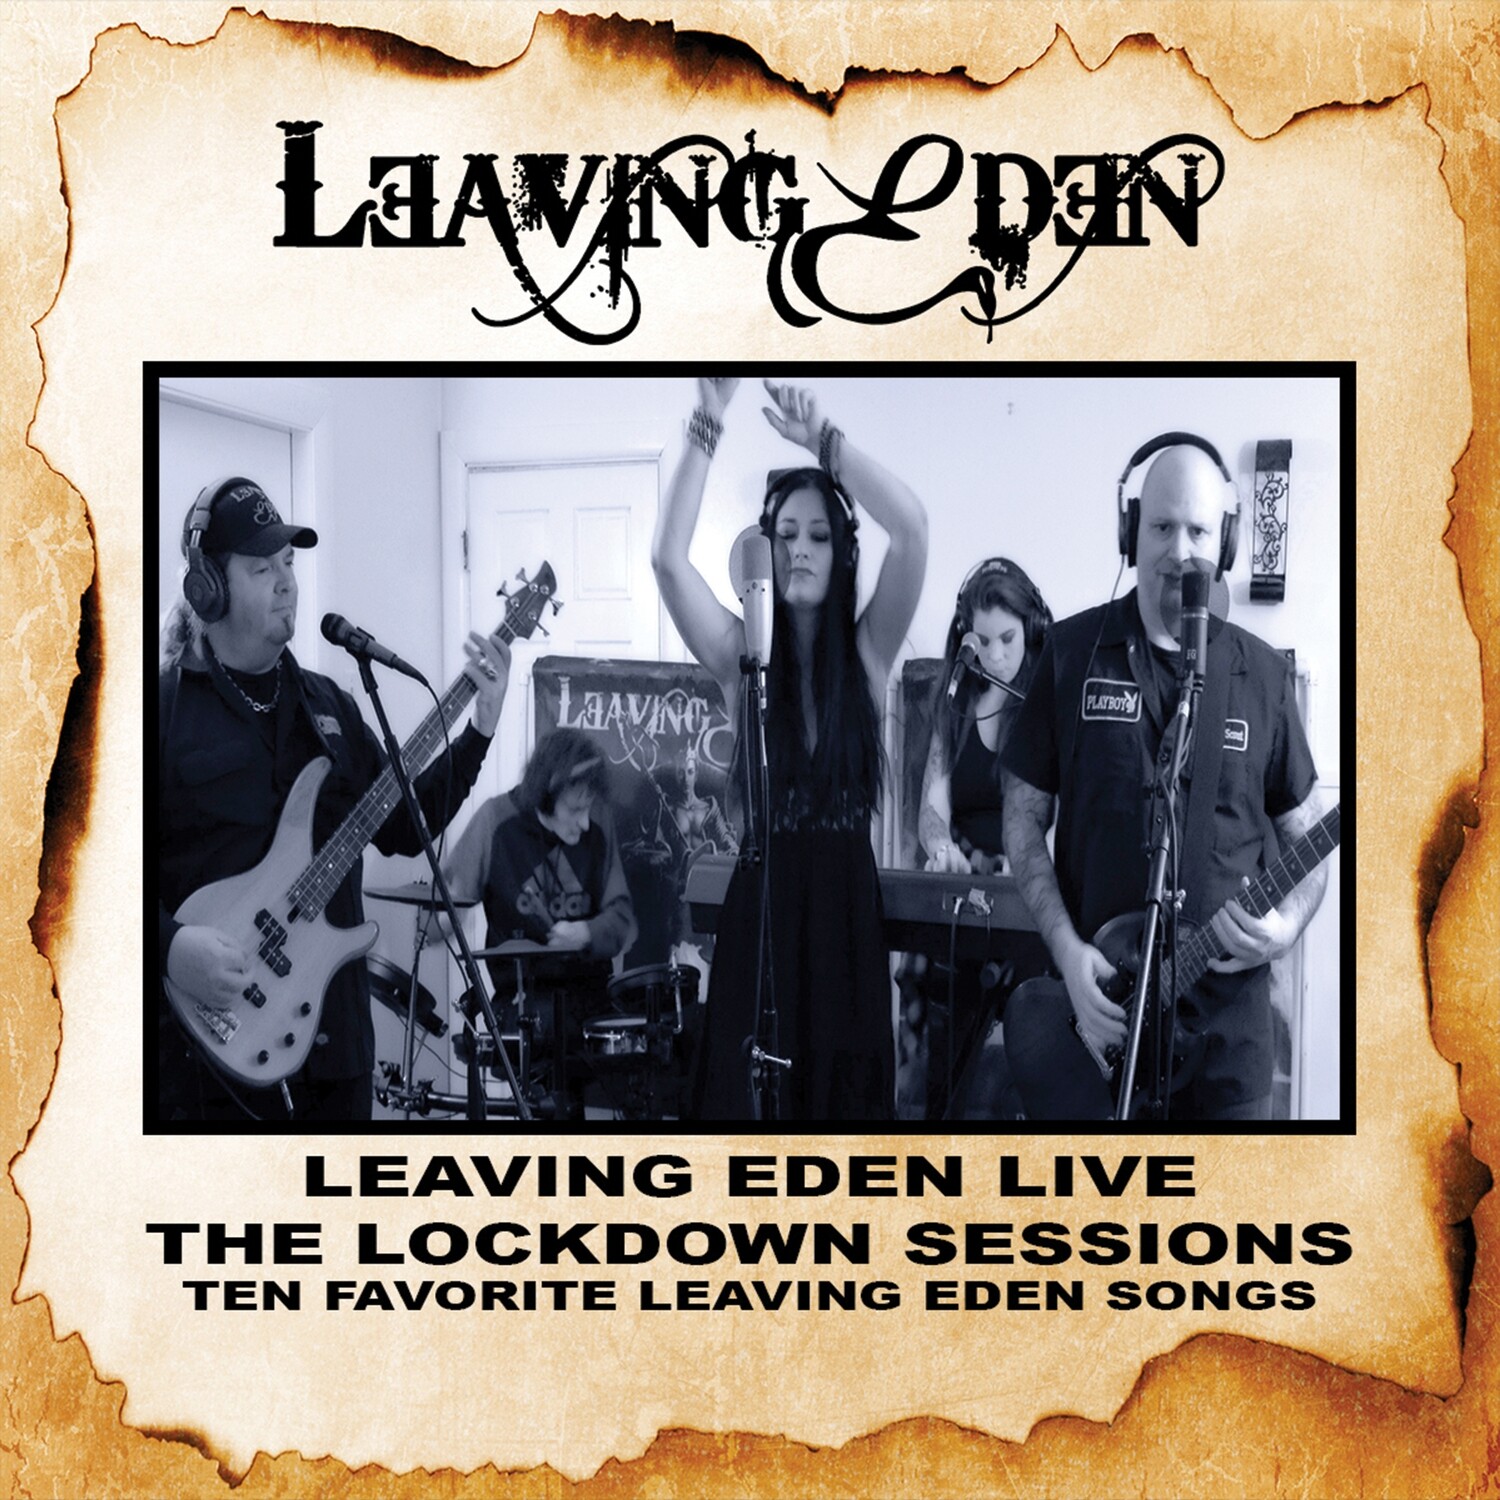 Live: The Lockdown Sessions by Leaving Eden [CD]